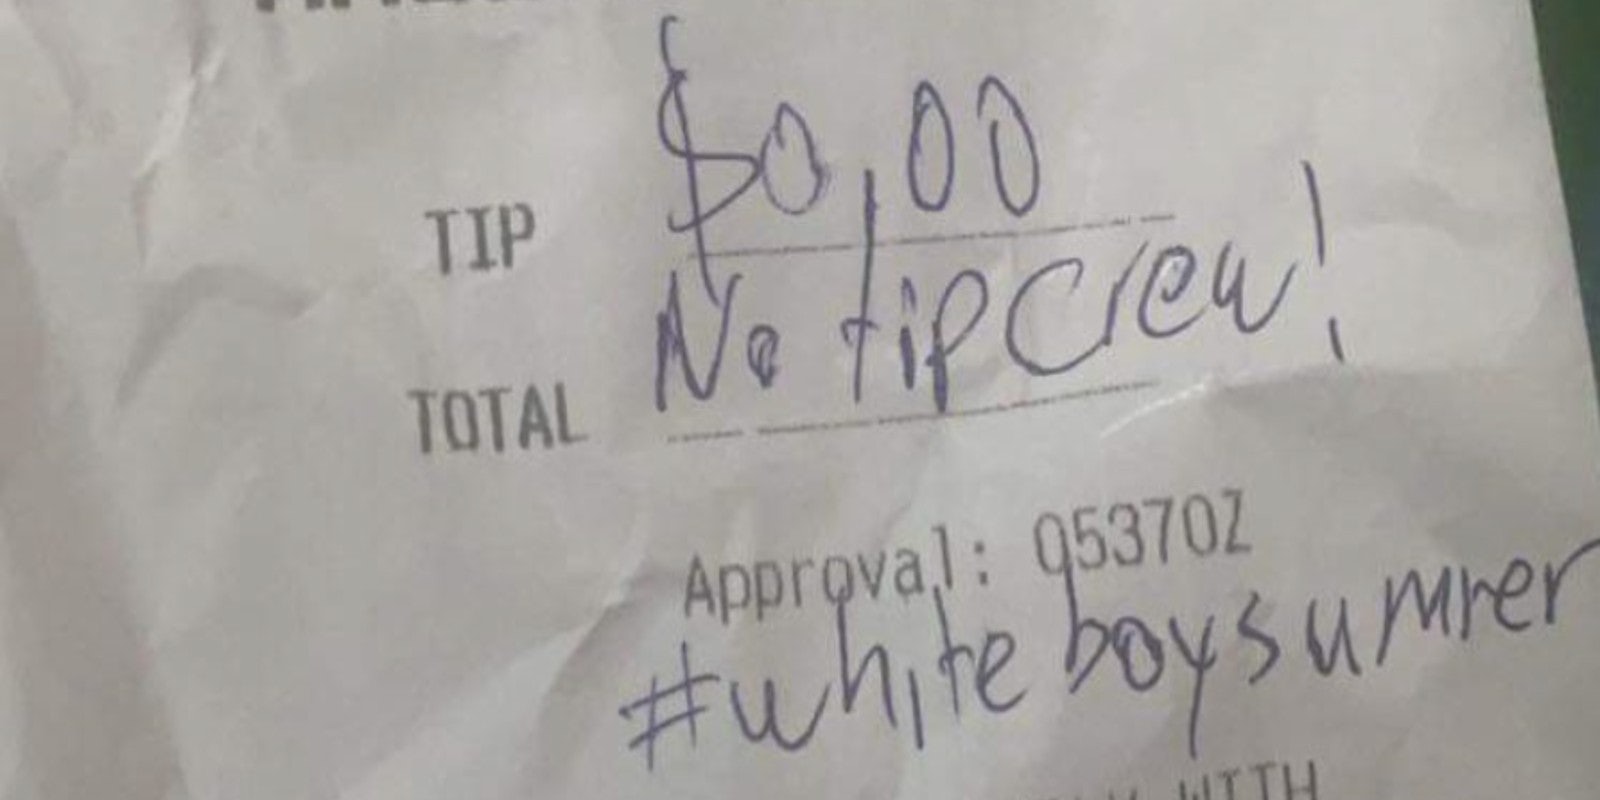 The tip on a $97.55 bill shows 'No tip crew' and #whiteboysummer